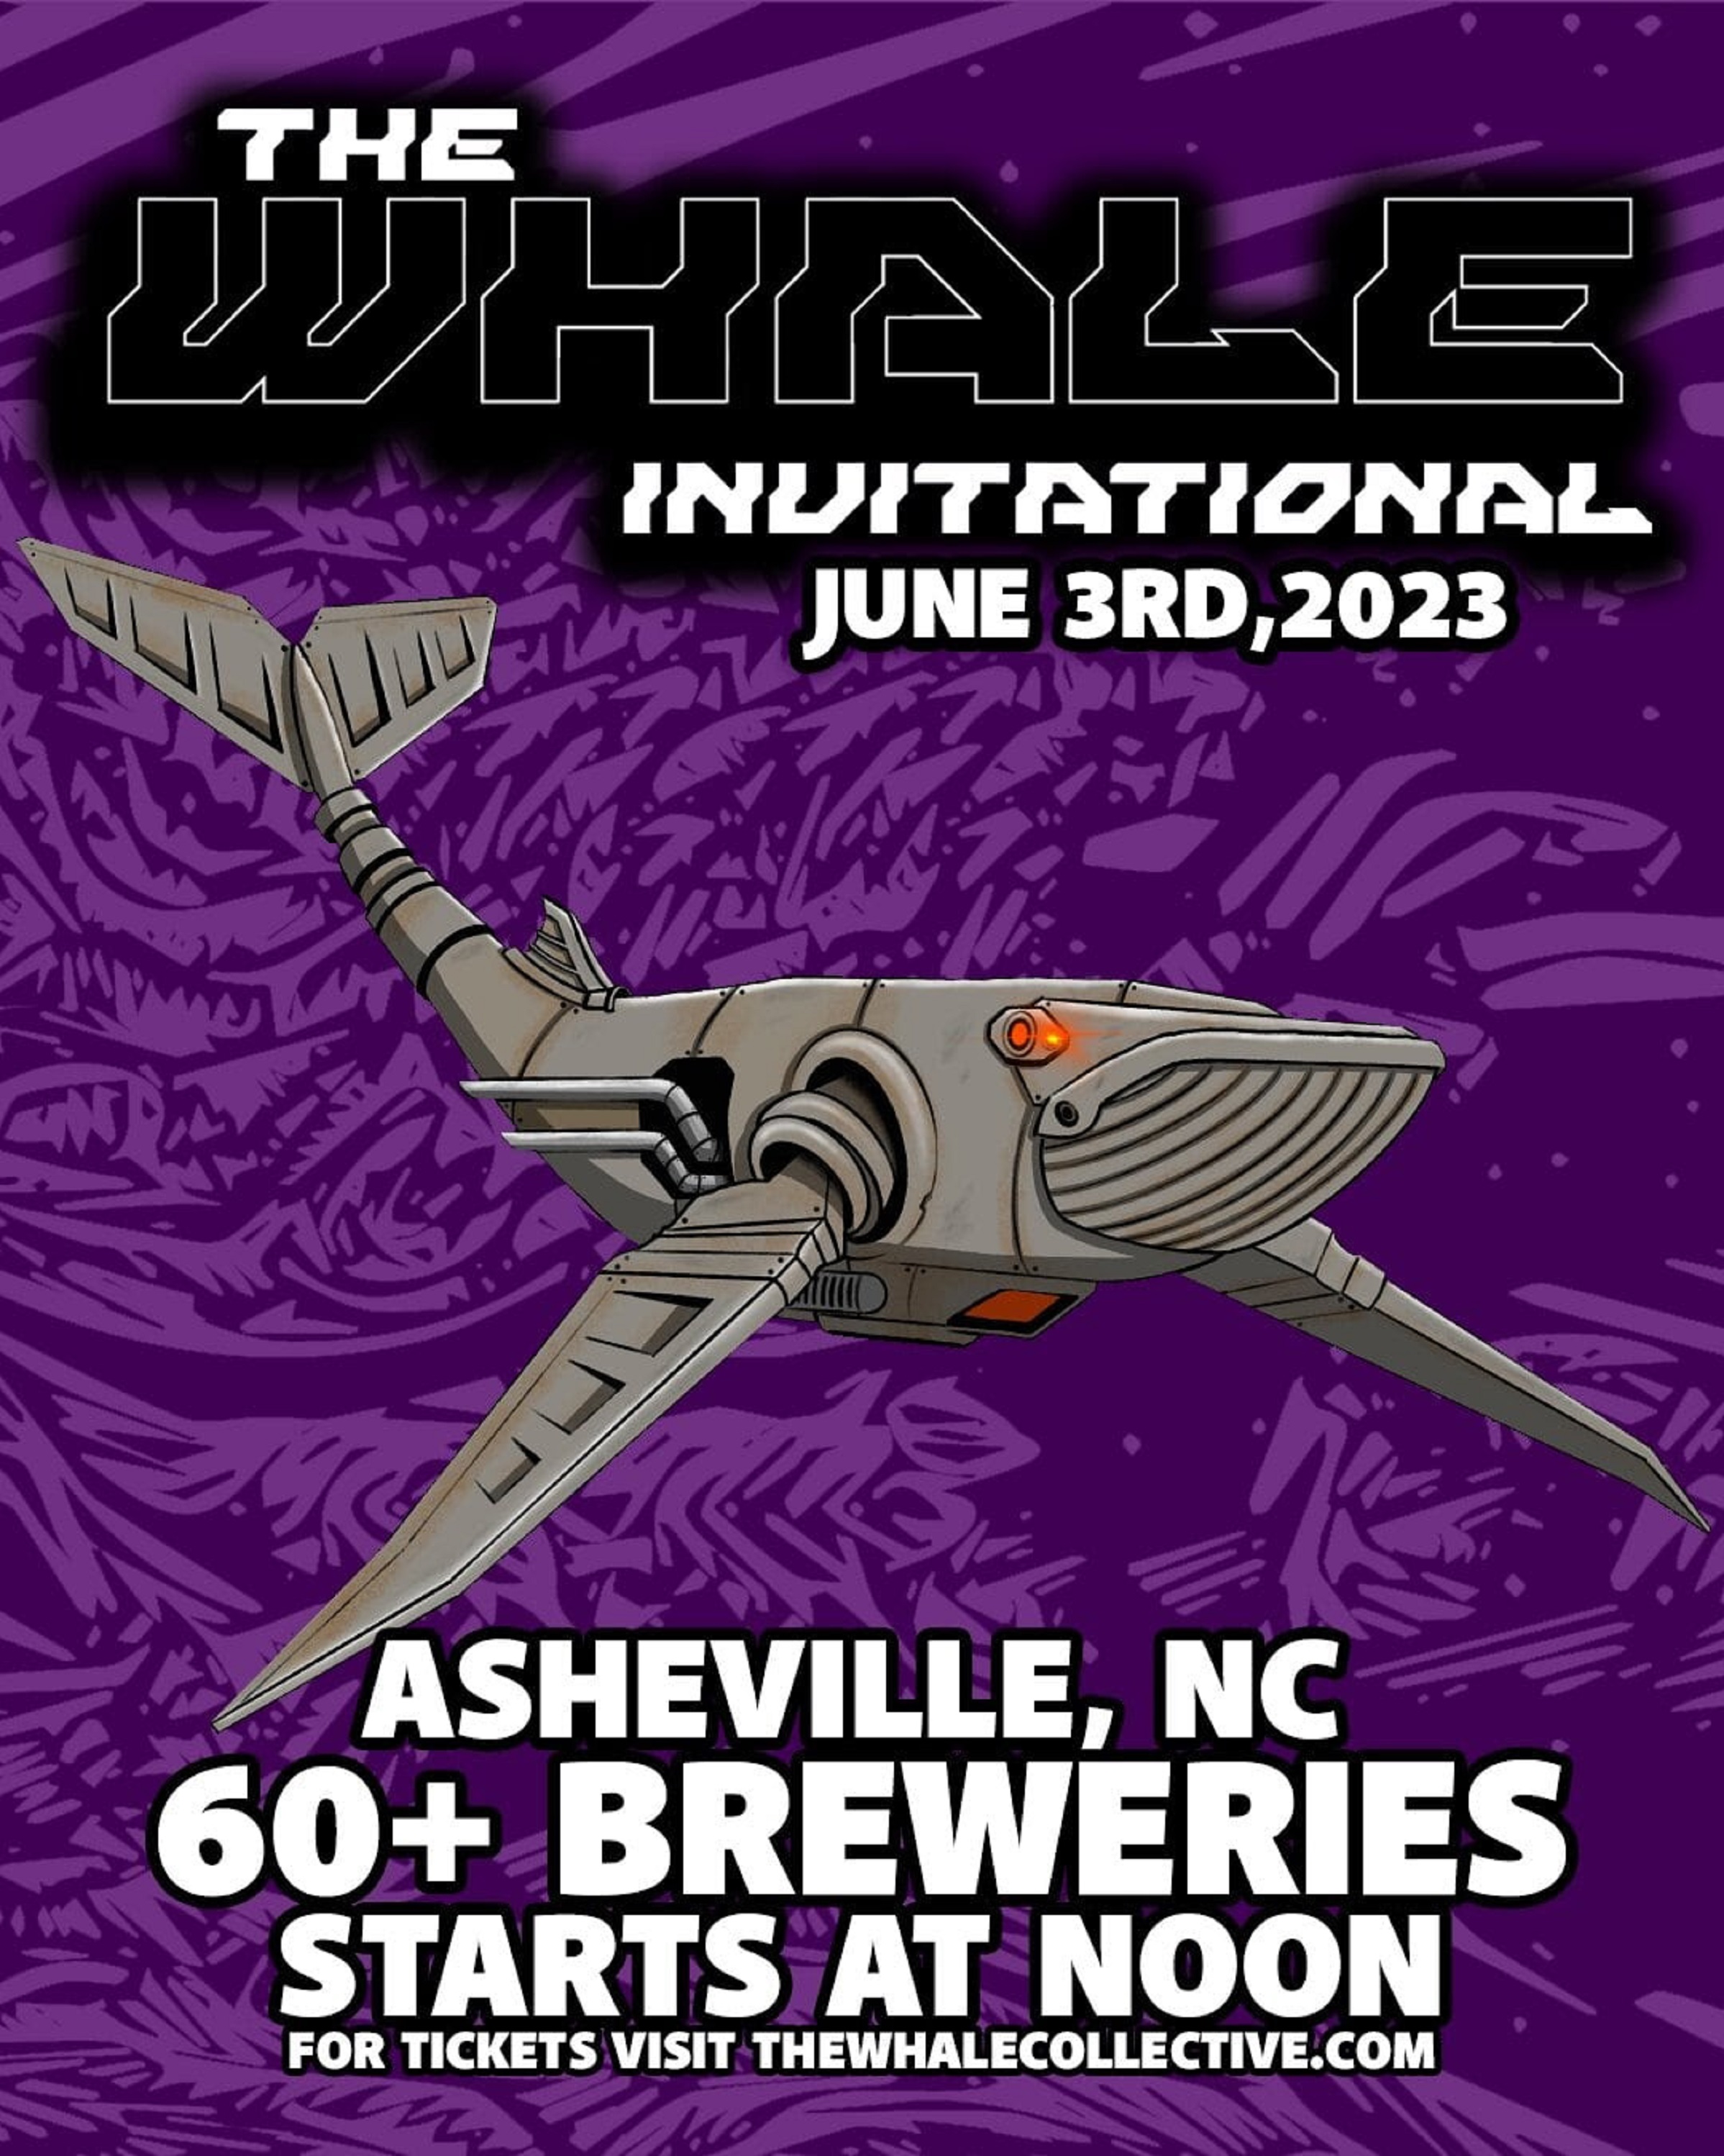 The Whale :: A Craft Beer Collective to Host Inaugural International Beer Festival, The Whale Invitational, June 3rd, 2023